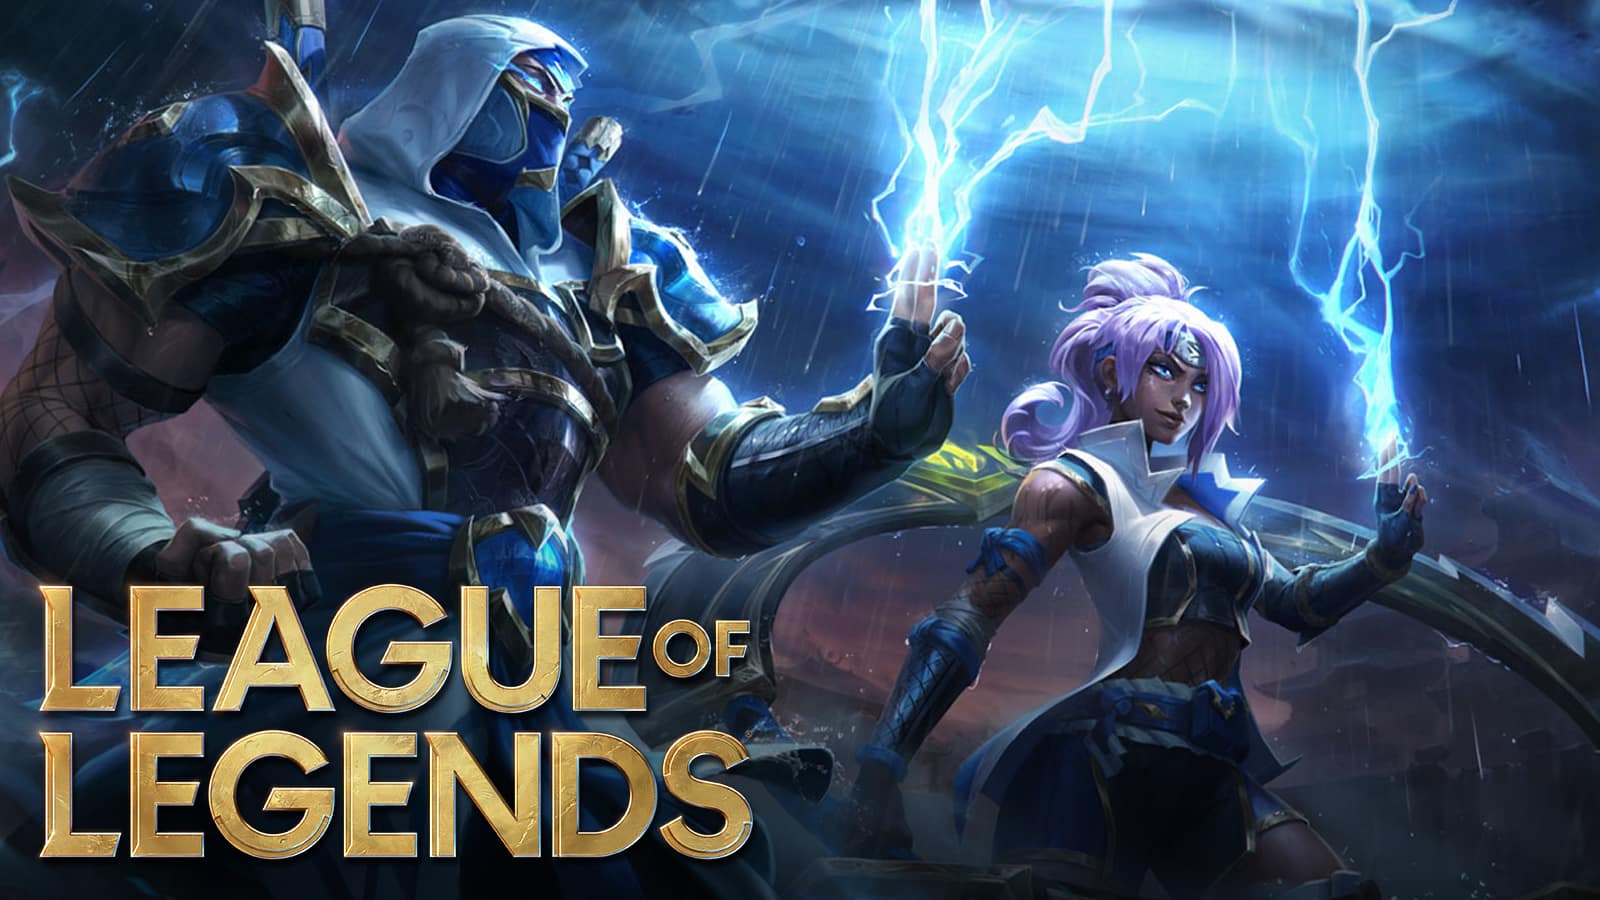 Shockblade Shen and Qiyana in League of Legends.